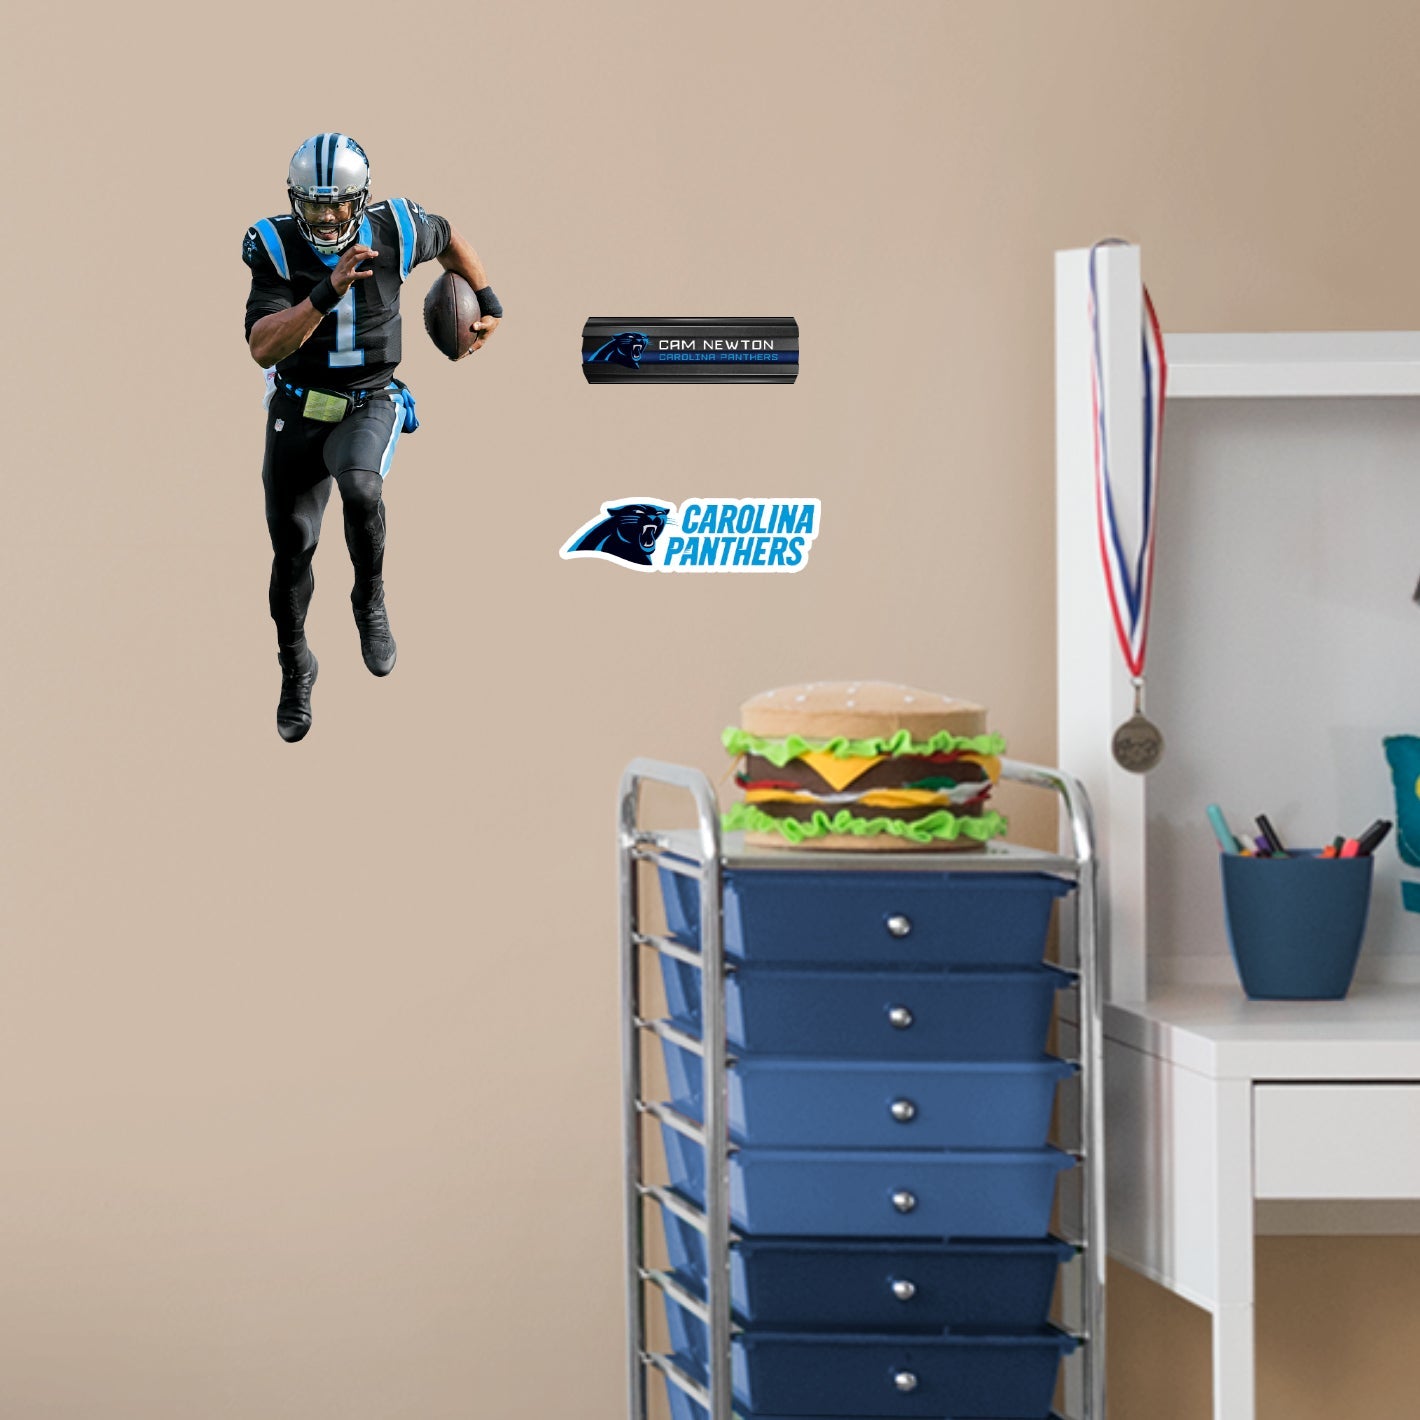 Carolina Panthers: Cam Newton - Officially Licensed NFL Removable Adhesive Decal